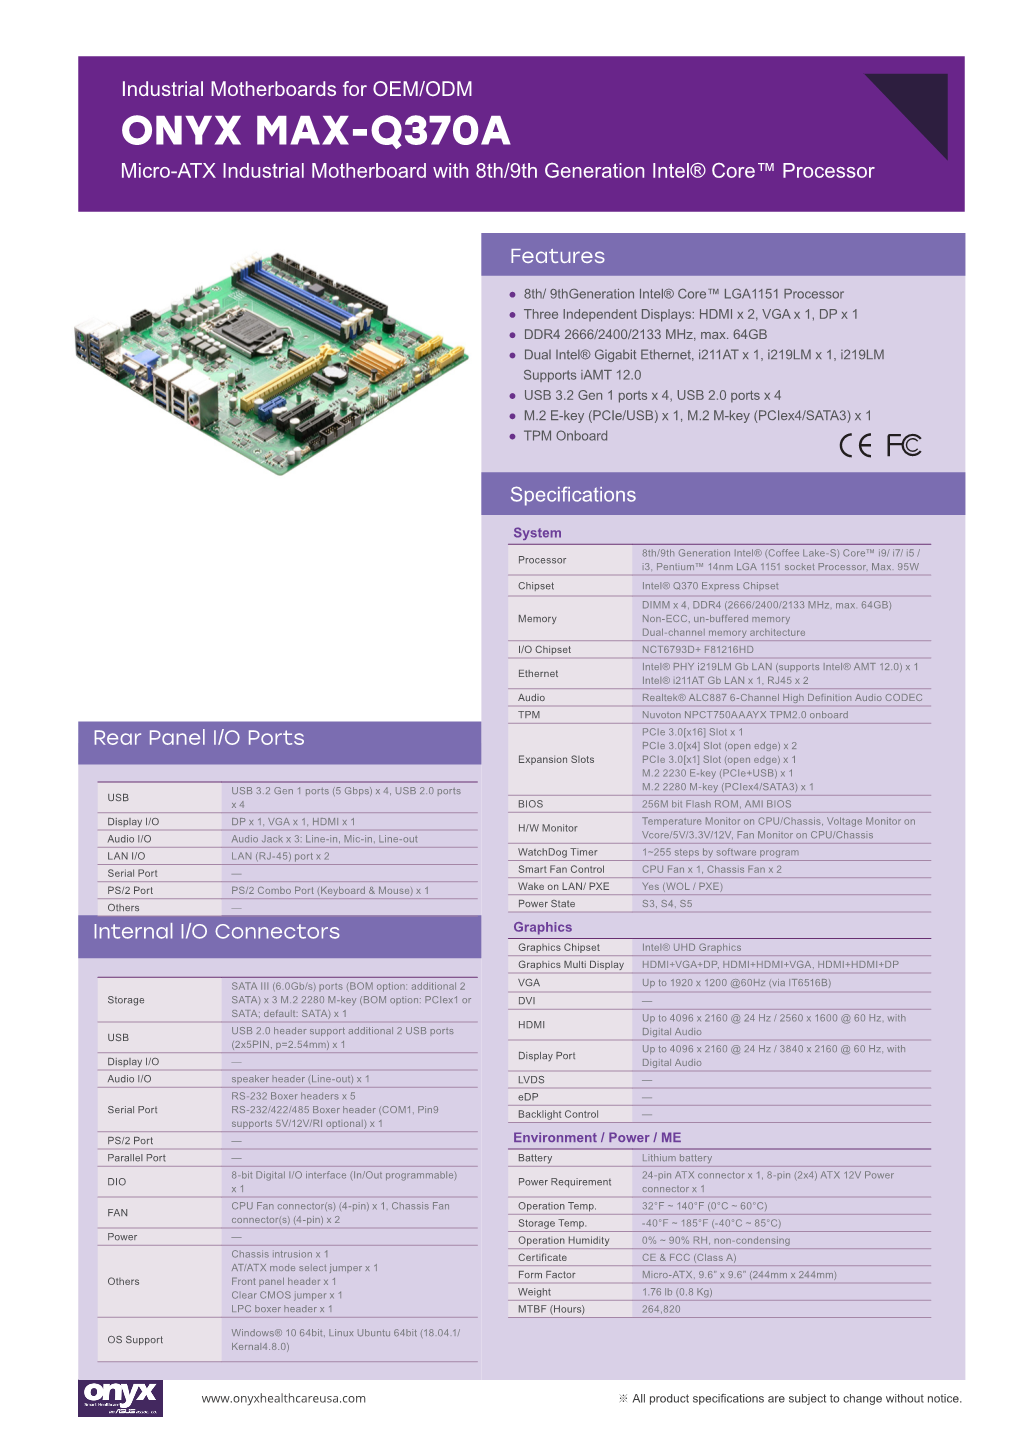 ONYX MAX-Q370A Micro-ATX Industrial Motherboard with 8Th/9Th Generation Intel® Core™ Processor